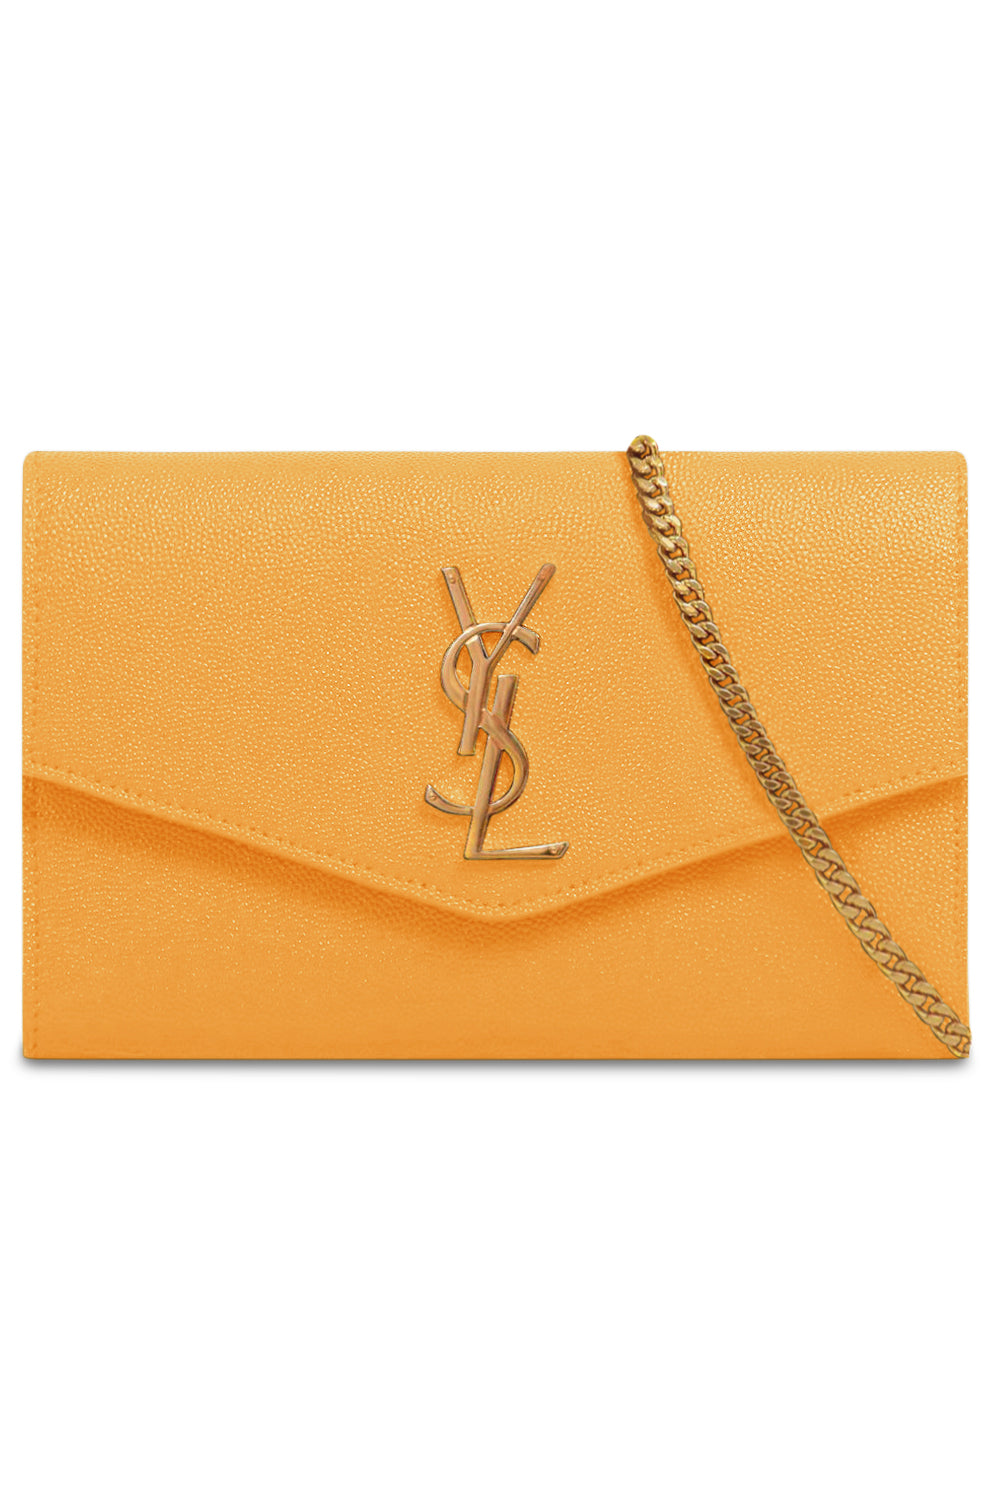 SAINT LAURENT BAGS MULTI UPTOWN WALLET ON CHAIN | YELLOW FEVER/GOLD